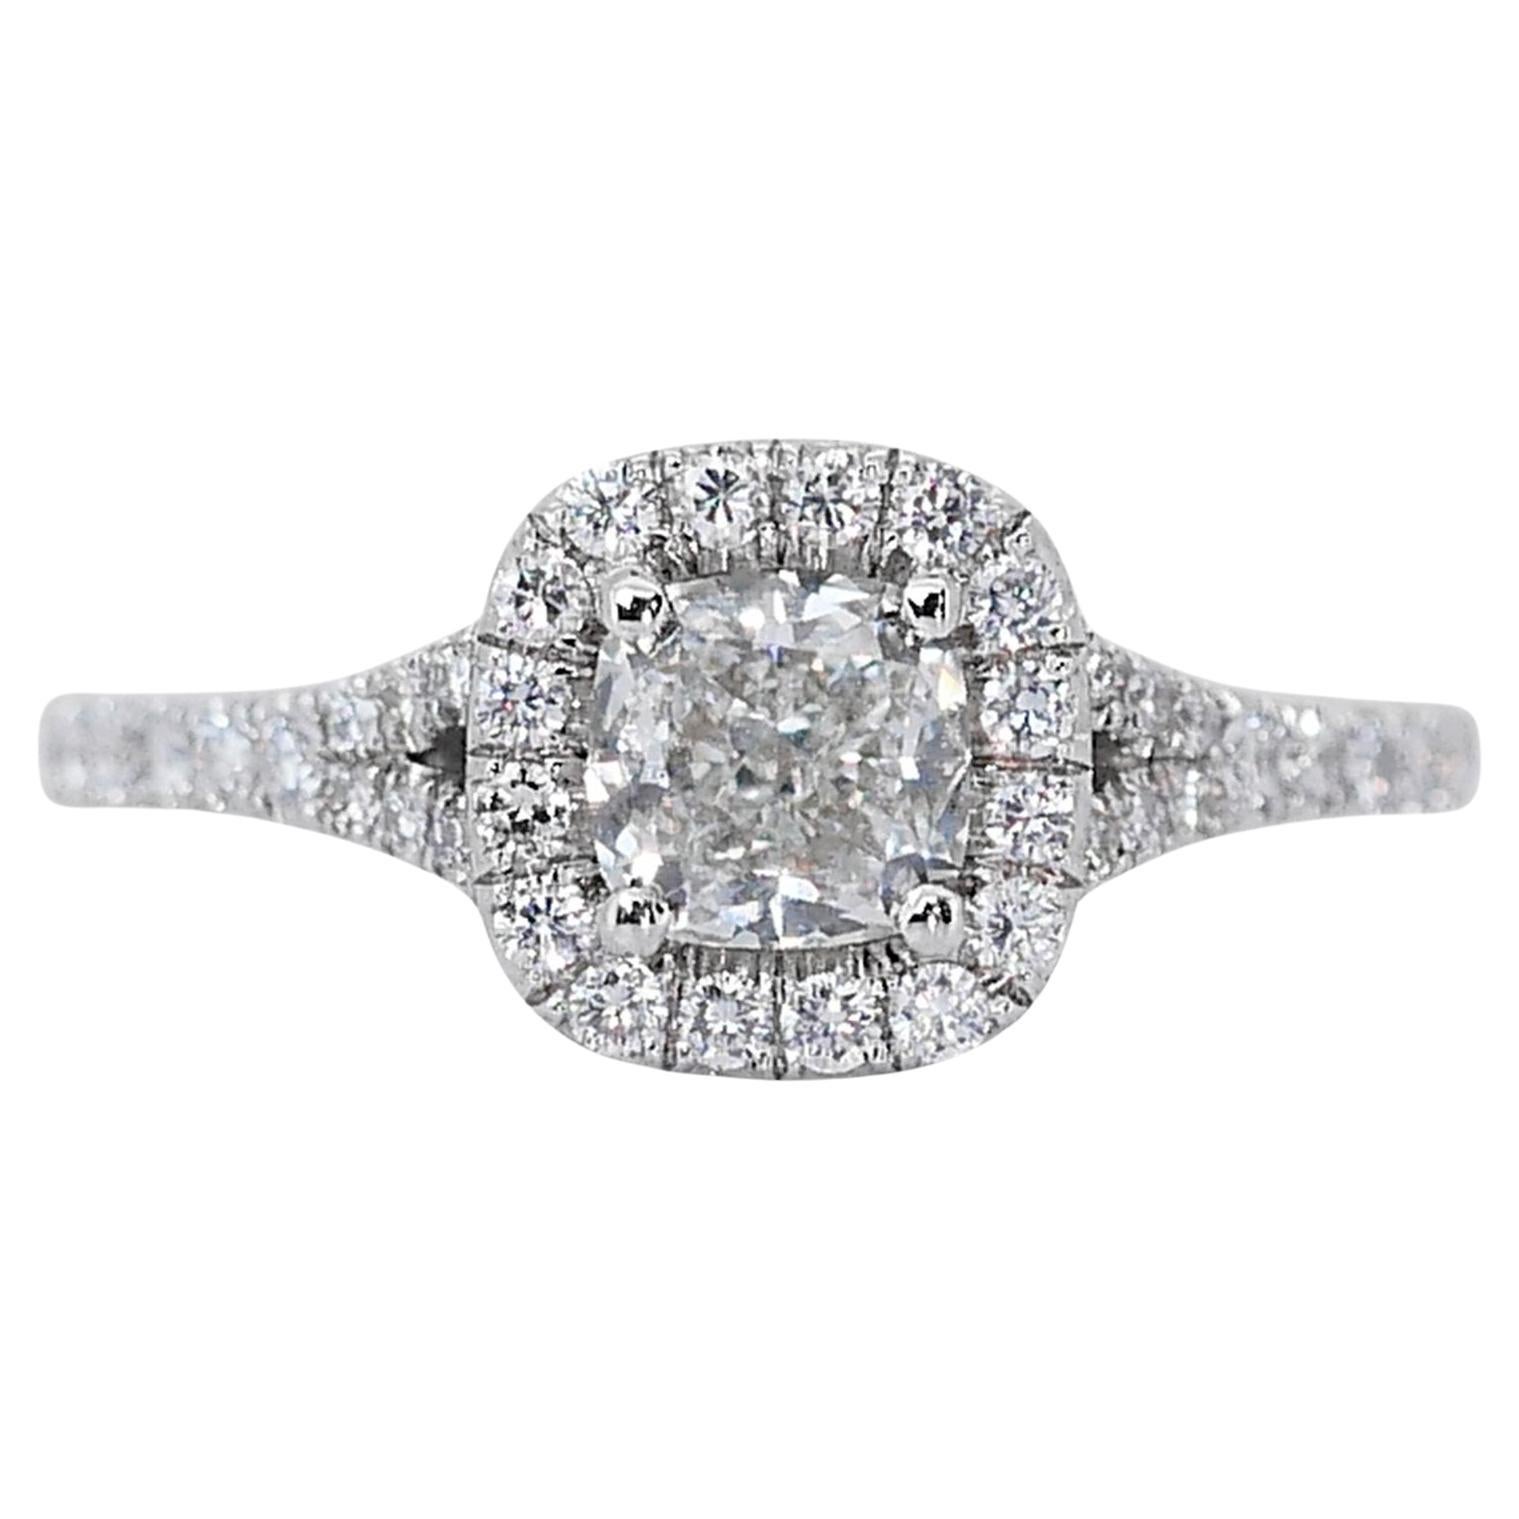 Elegant 1.40ct Cushion-Cut Diamond Halo Ring in 18k White Gold - GIA Certified For Sale